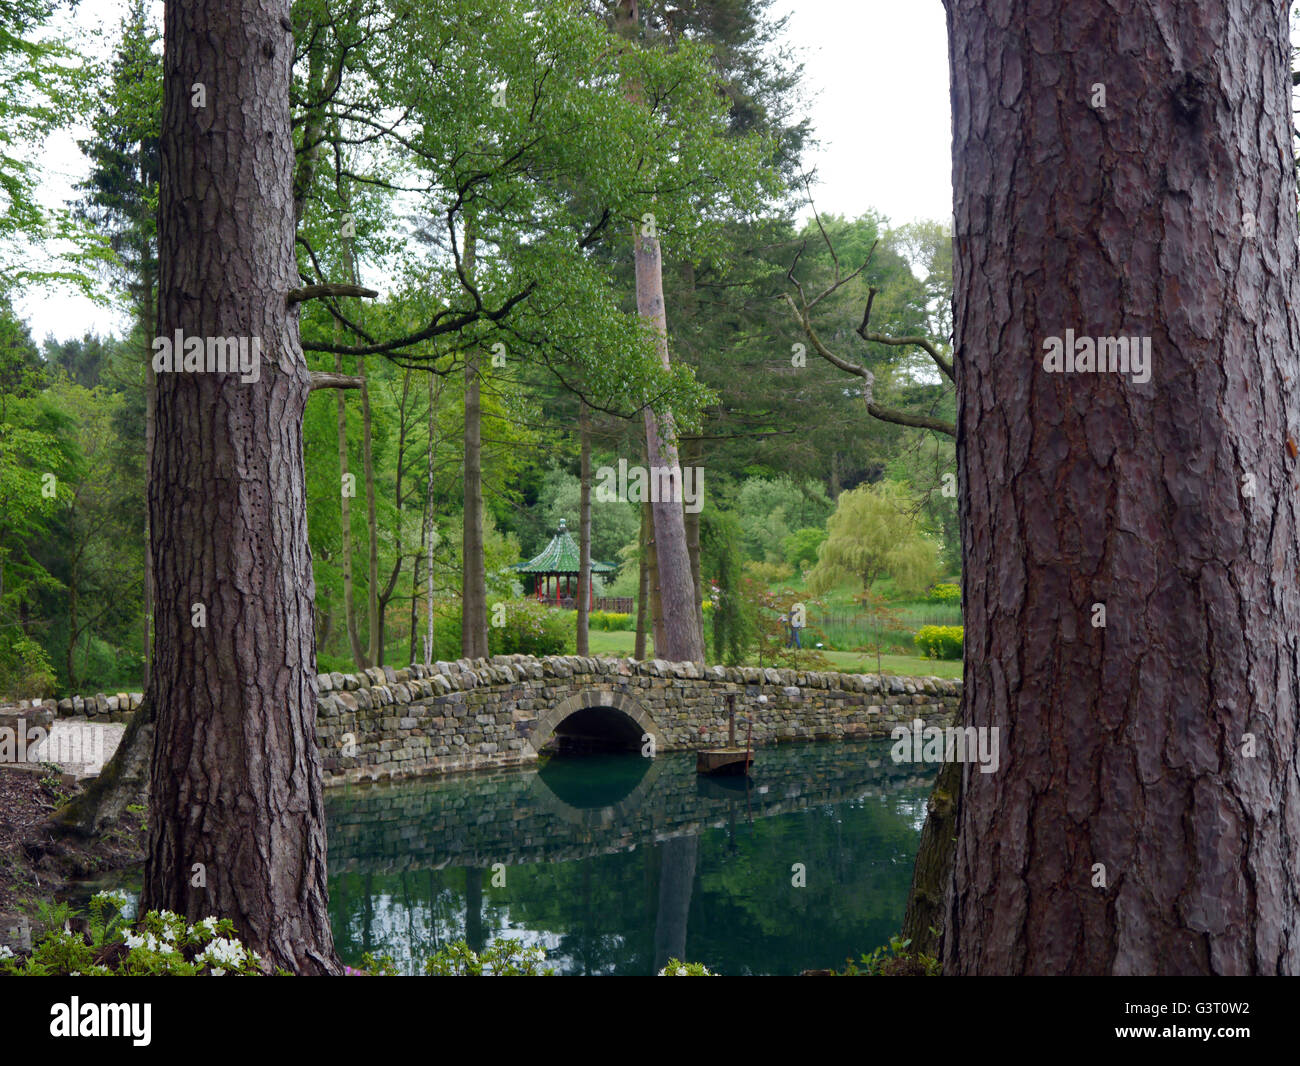 Dry Stone Bridge Reflected in a Lake Between Trees at the Himalayan Garden & Sculpture Park, North Yorkshire, England UK. Stock Photo